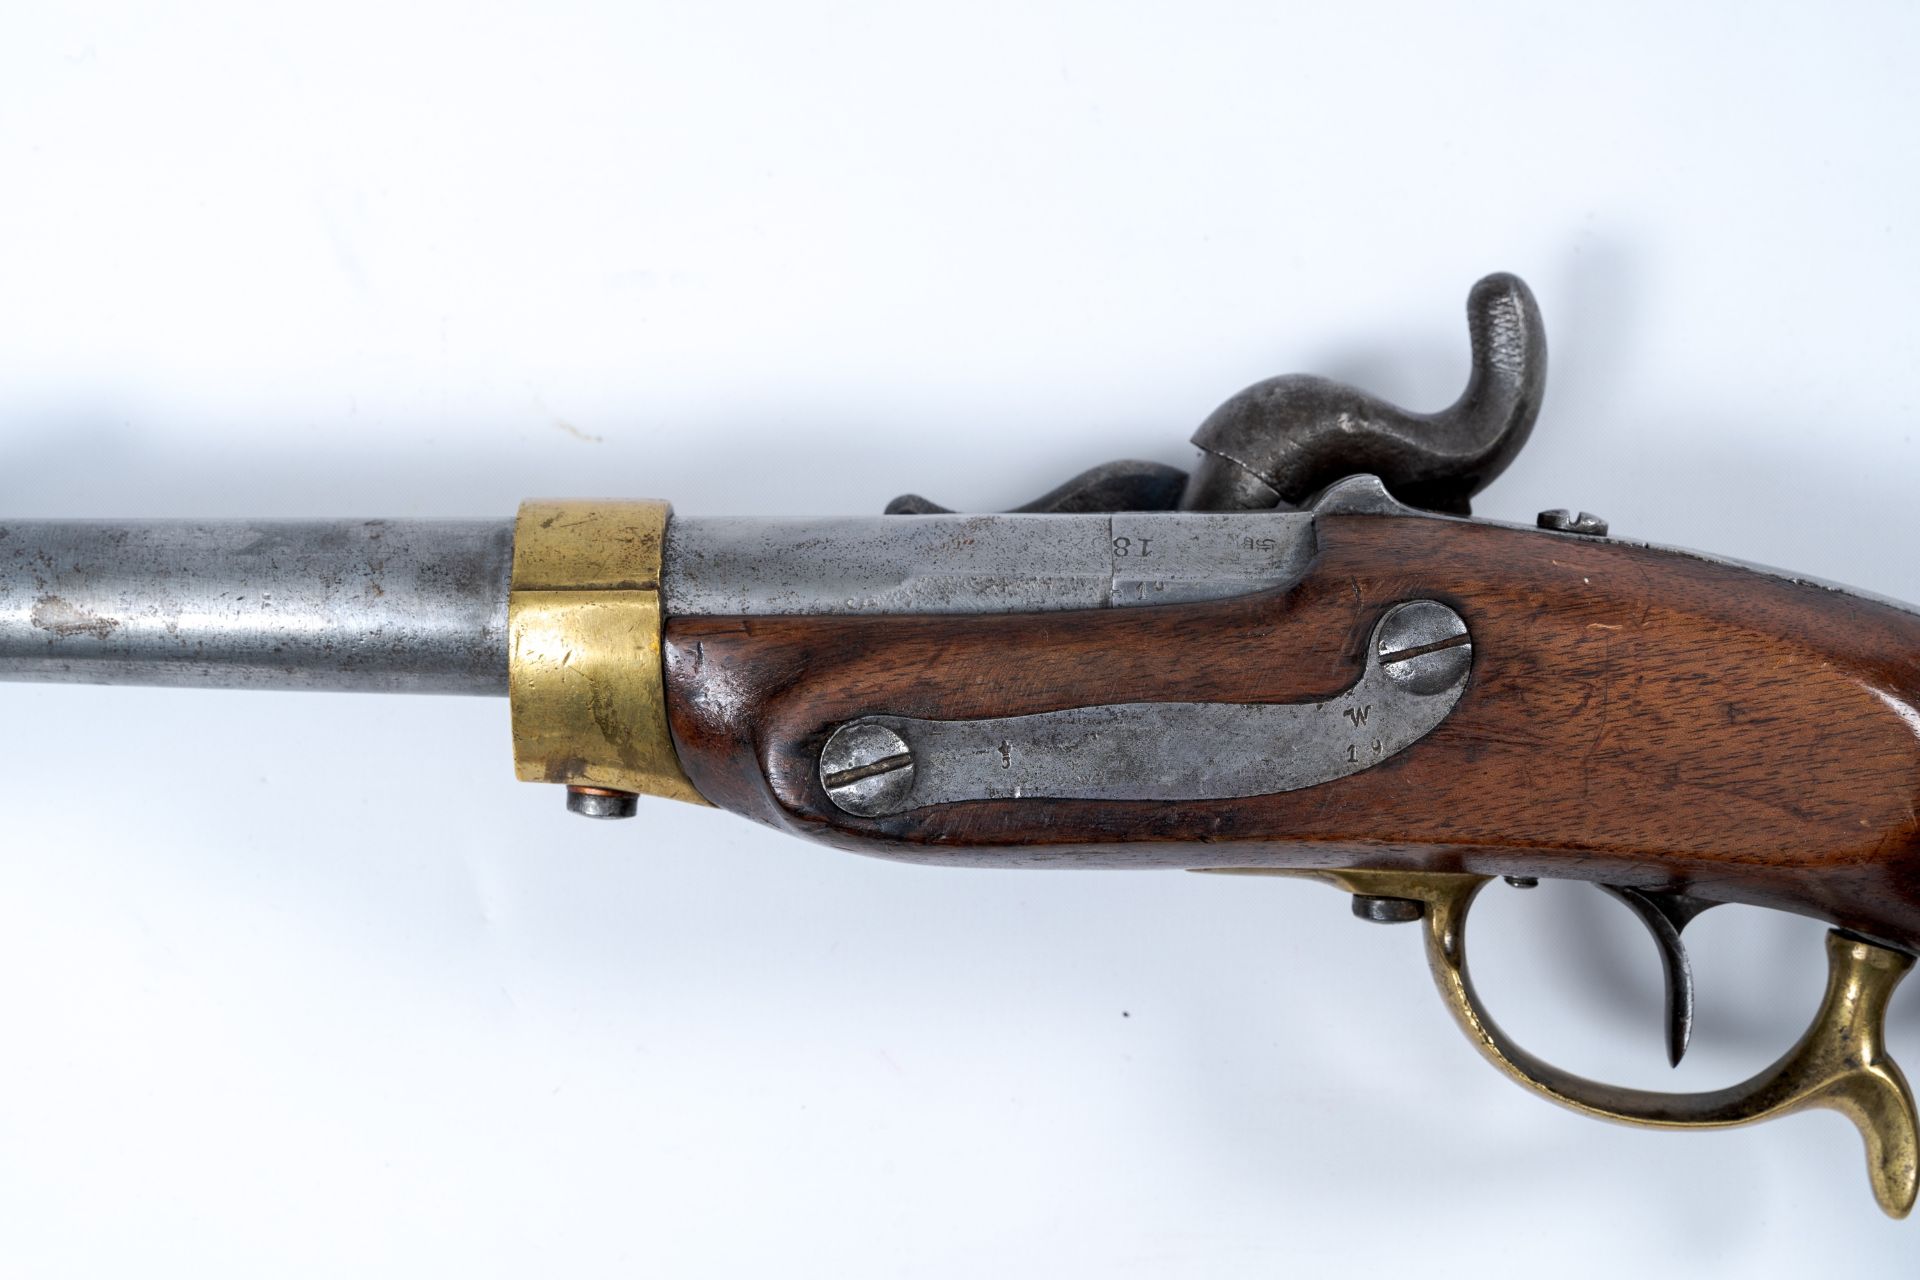 A German cavalry percussion pistol with extra safety system on the lock, monogram G.S., Potsdam, dat - Image 4 of 4